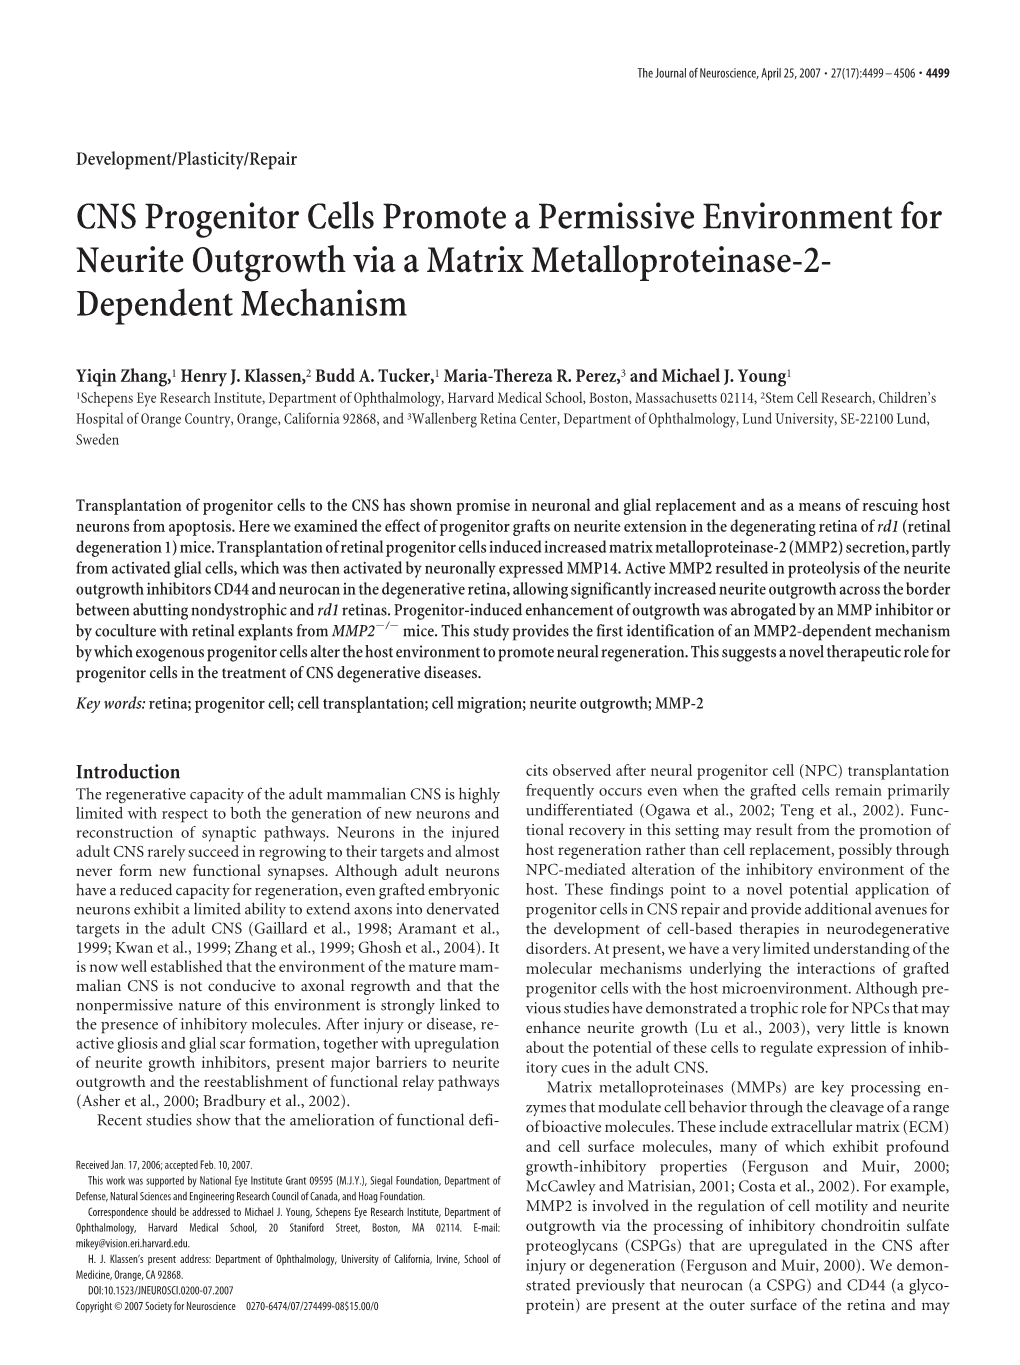 CNS Progenitor Cells Promote a Permissive Environment for Neurite Outgrowth Via a Matrix Metalloproteinase-2- Dependent Mechanism